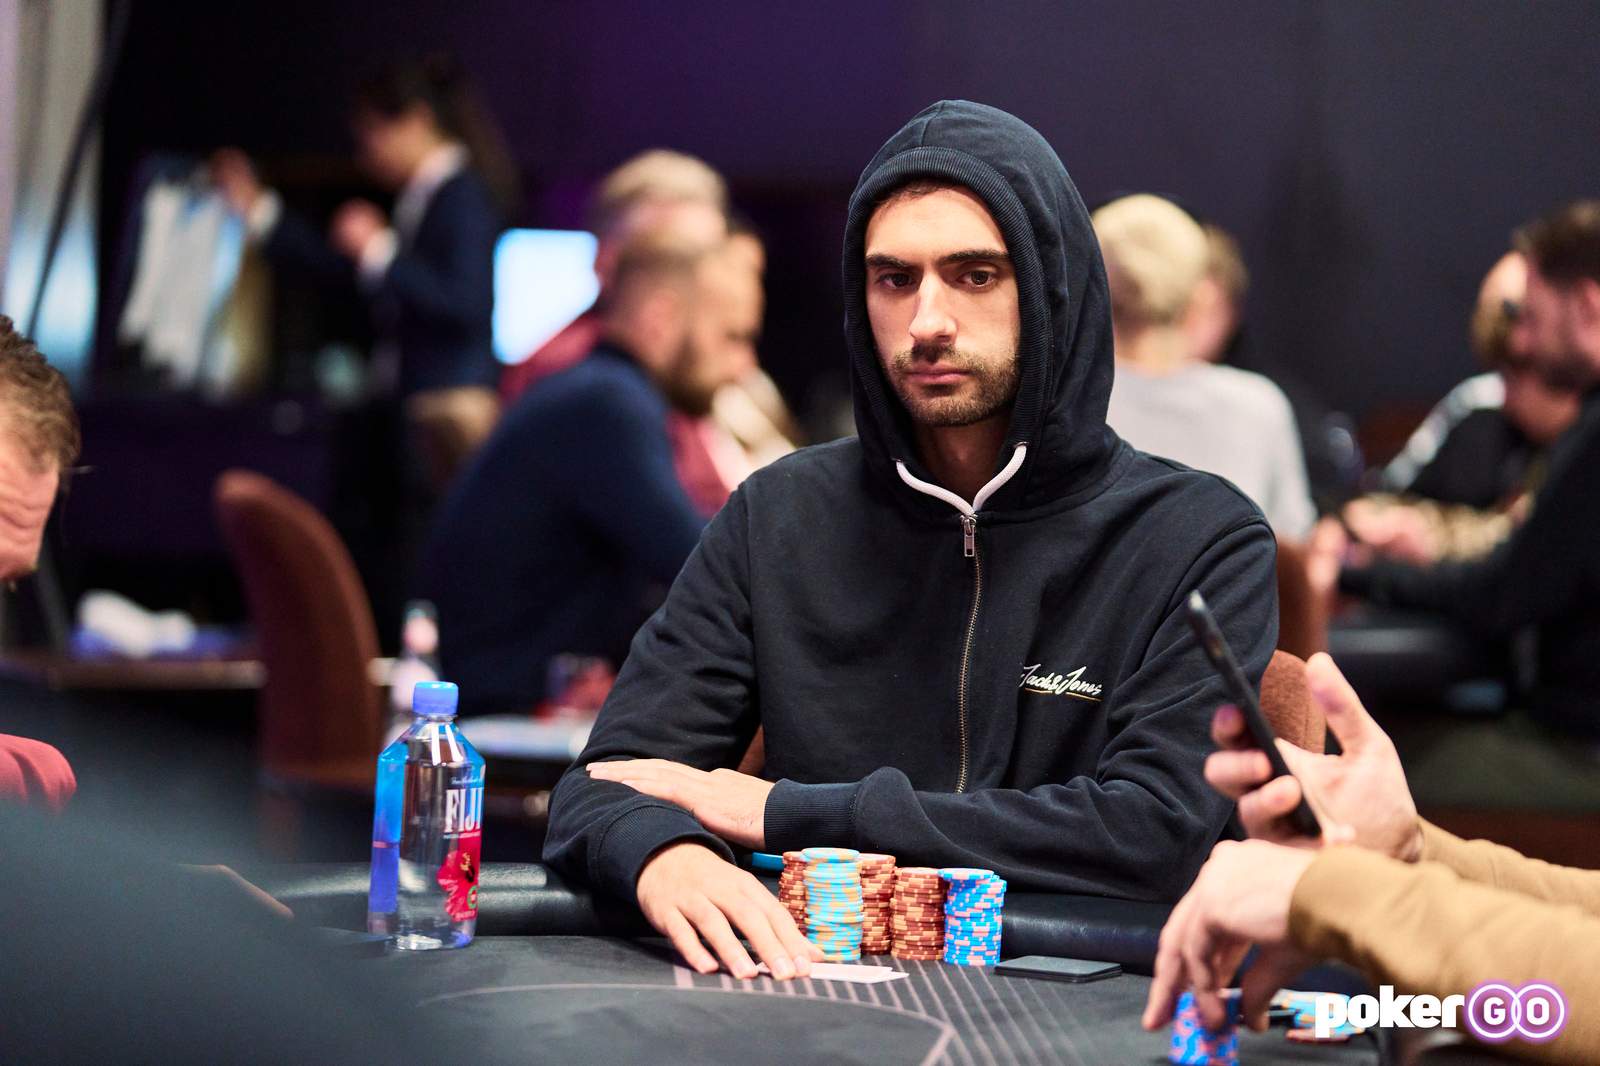 Stoyan Madanzhiev Leads PokerGO Cup Event #4 Final Table